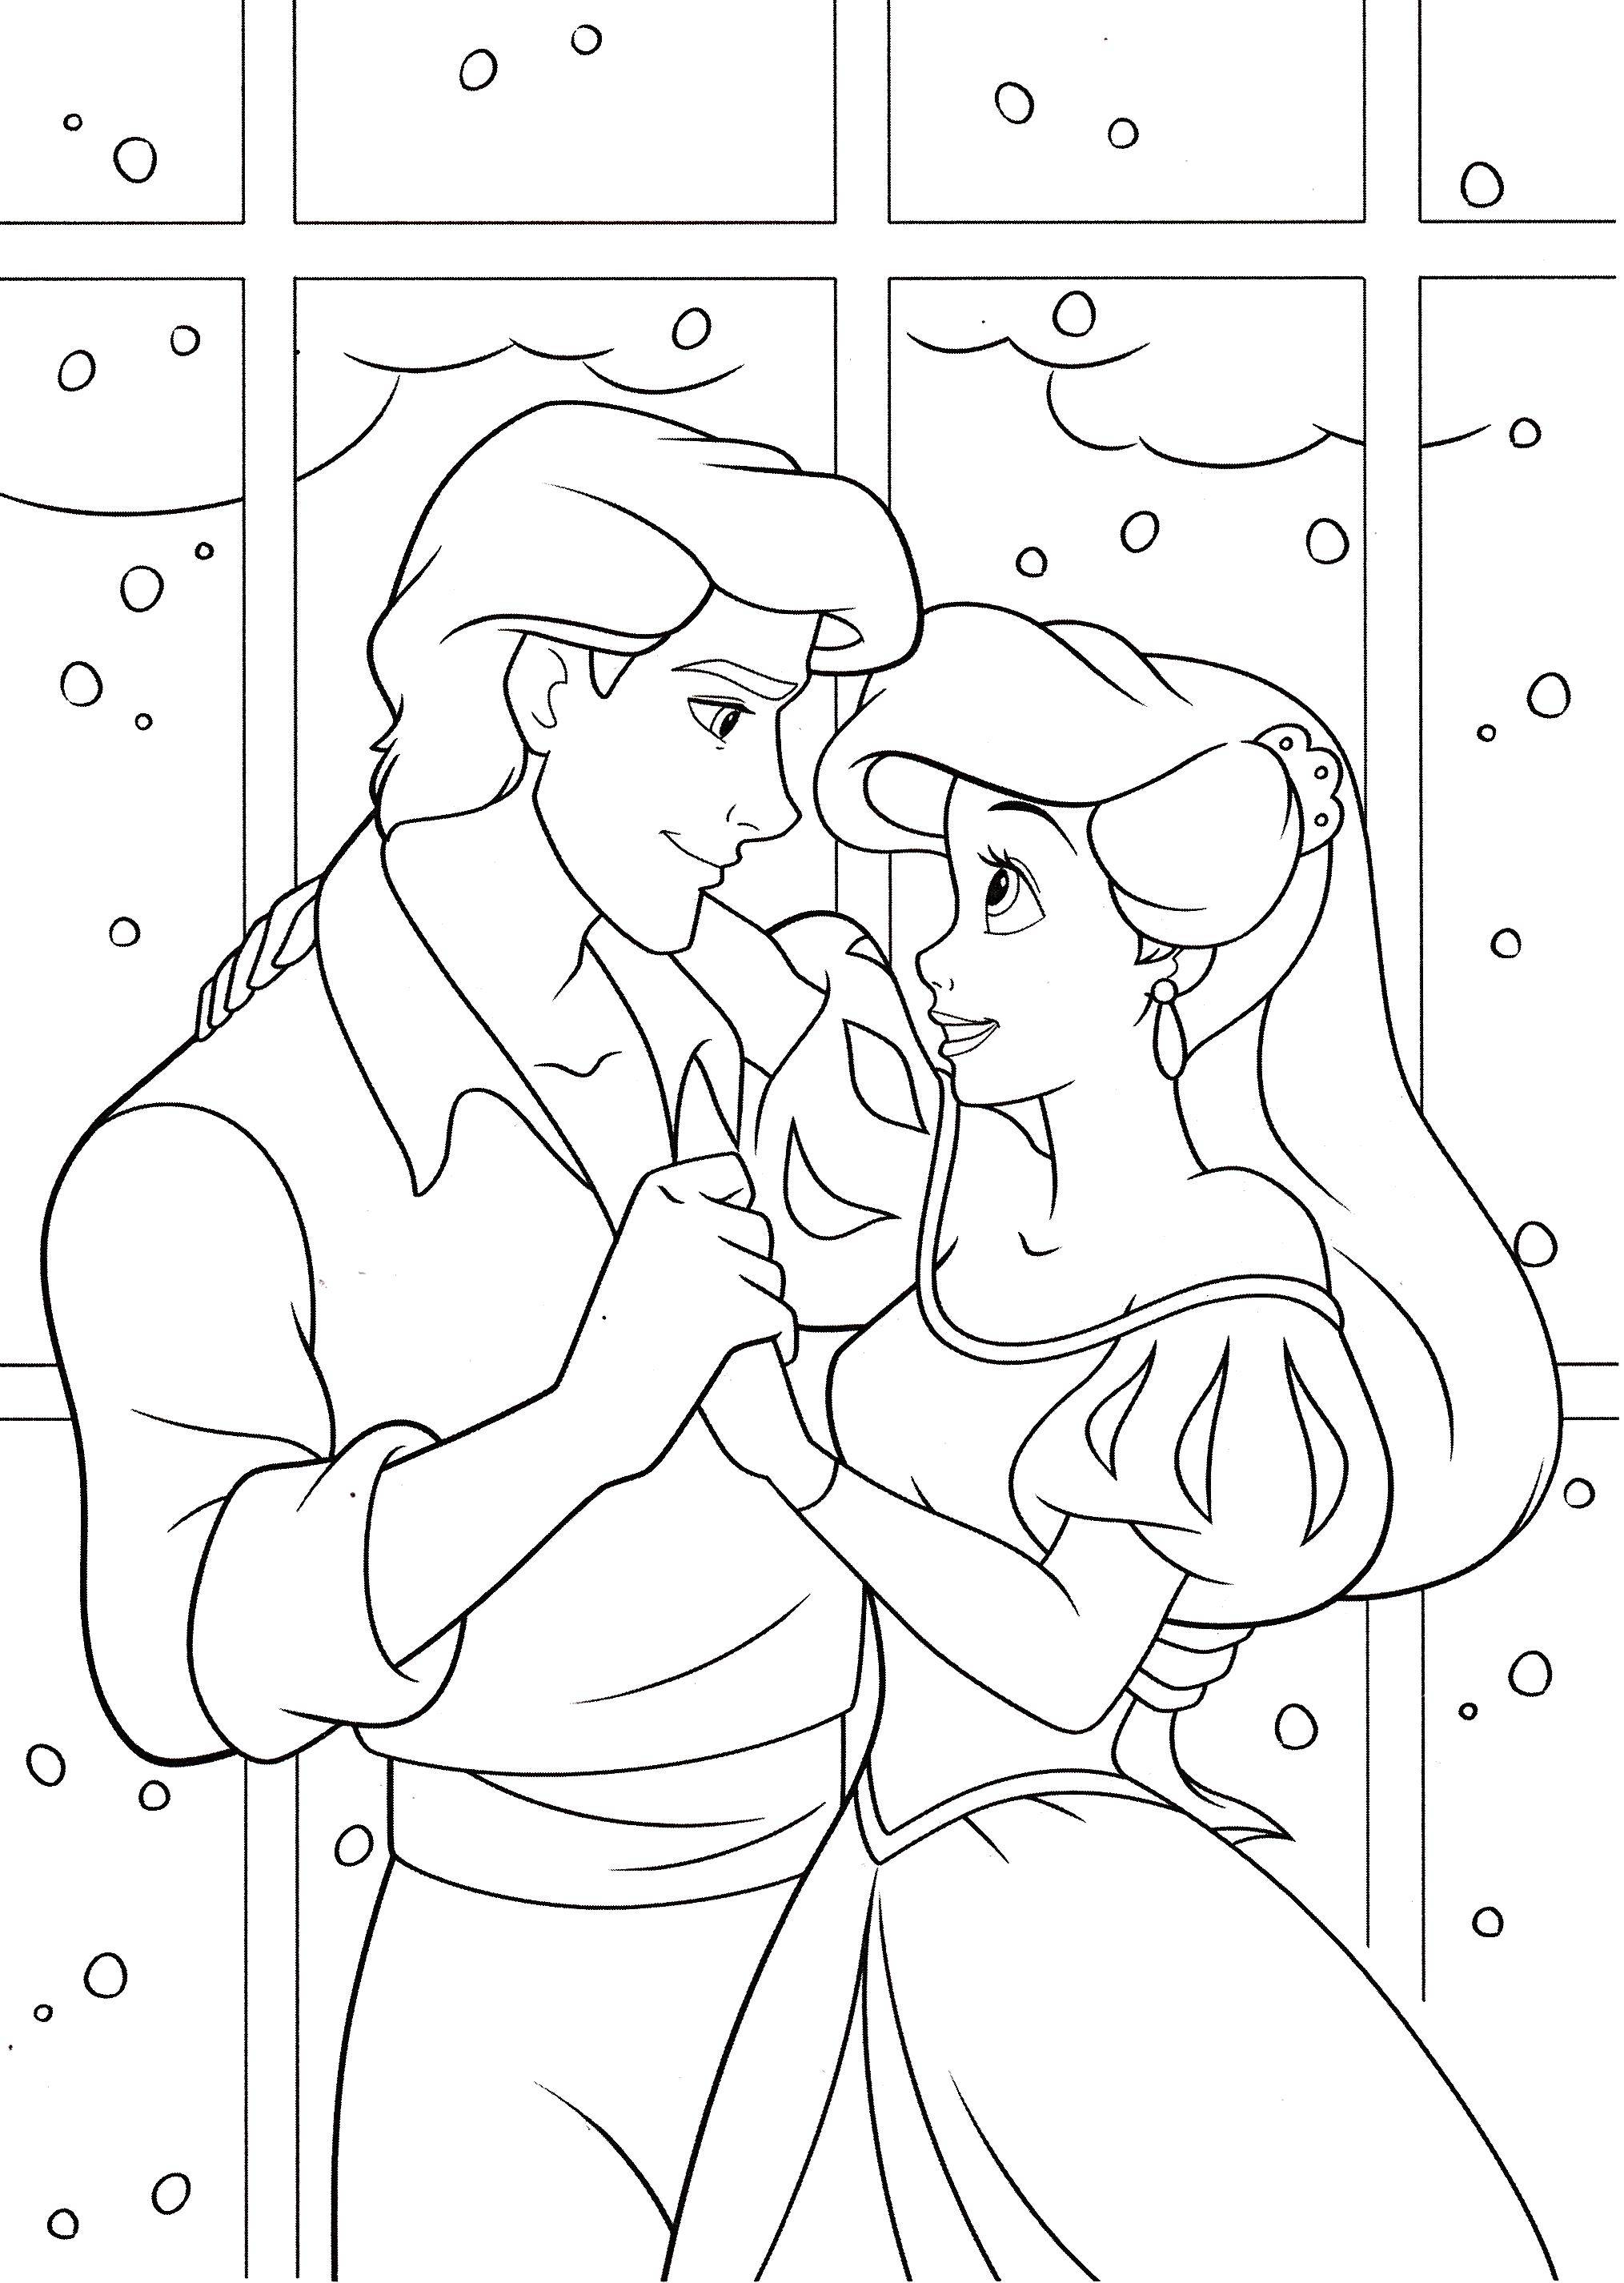 Coloring Love Eric and Ariel. Category The little mermaid. Tags:  Disney, the little mermaid, Ariel.